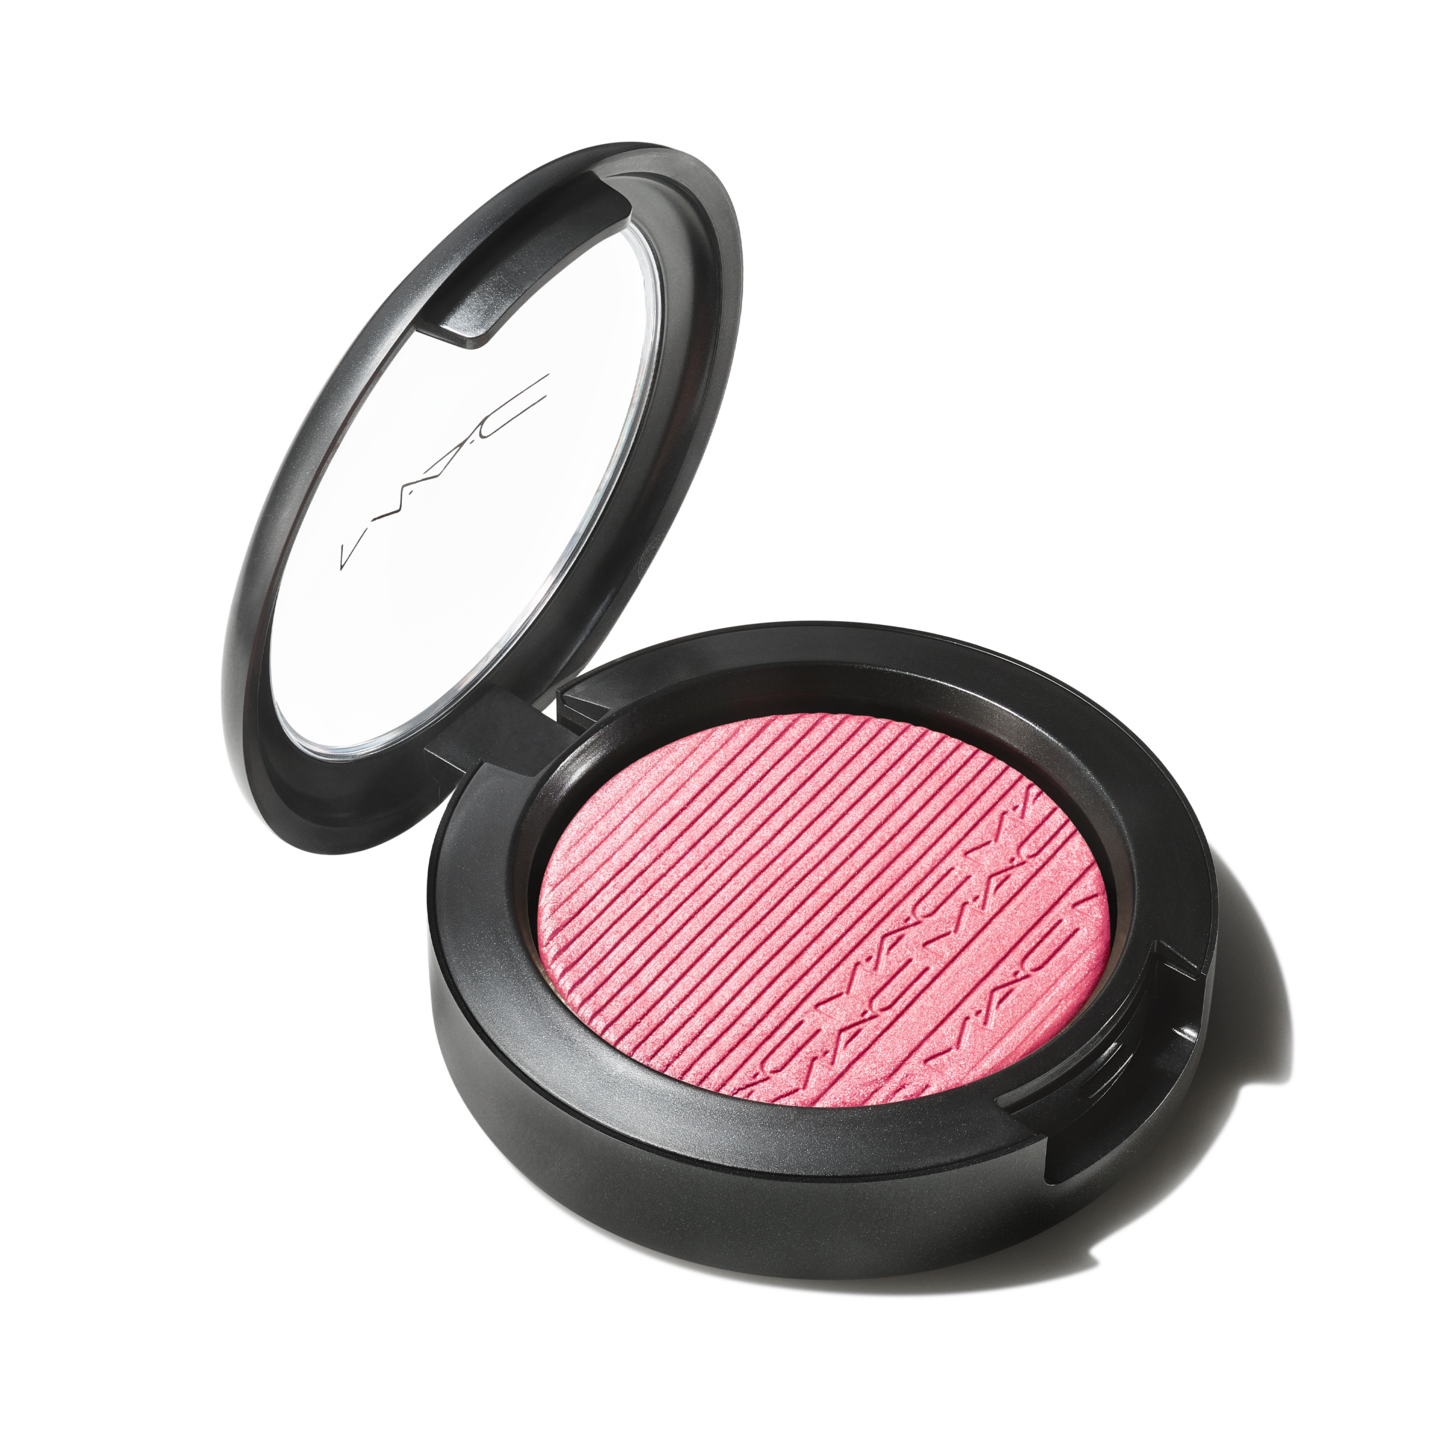 Extra Dimension Blush  MAC Cosmetics - Official Site